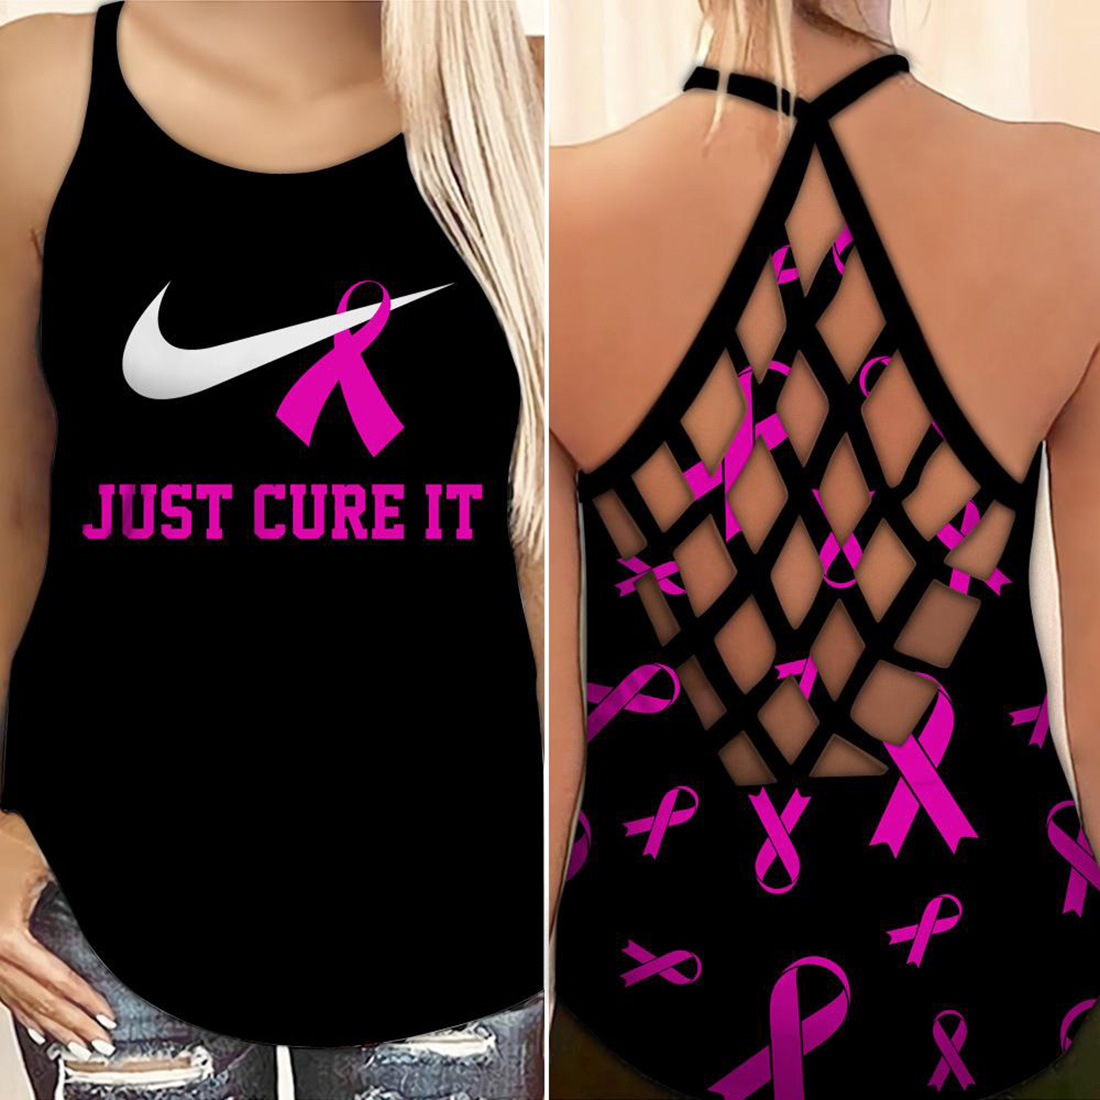 Nike breast cancer awareness Just cure it criss-cross open back camisole tank top